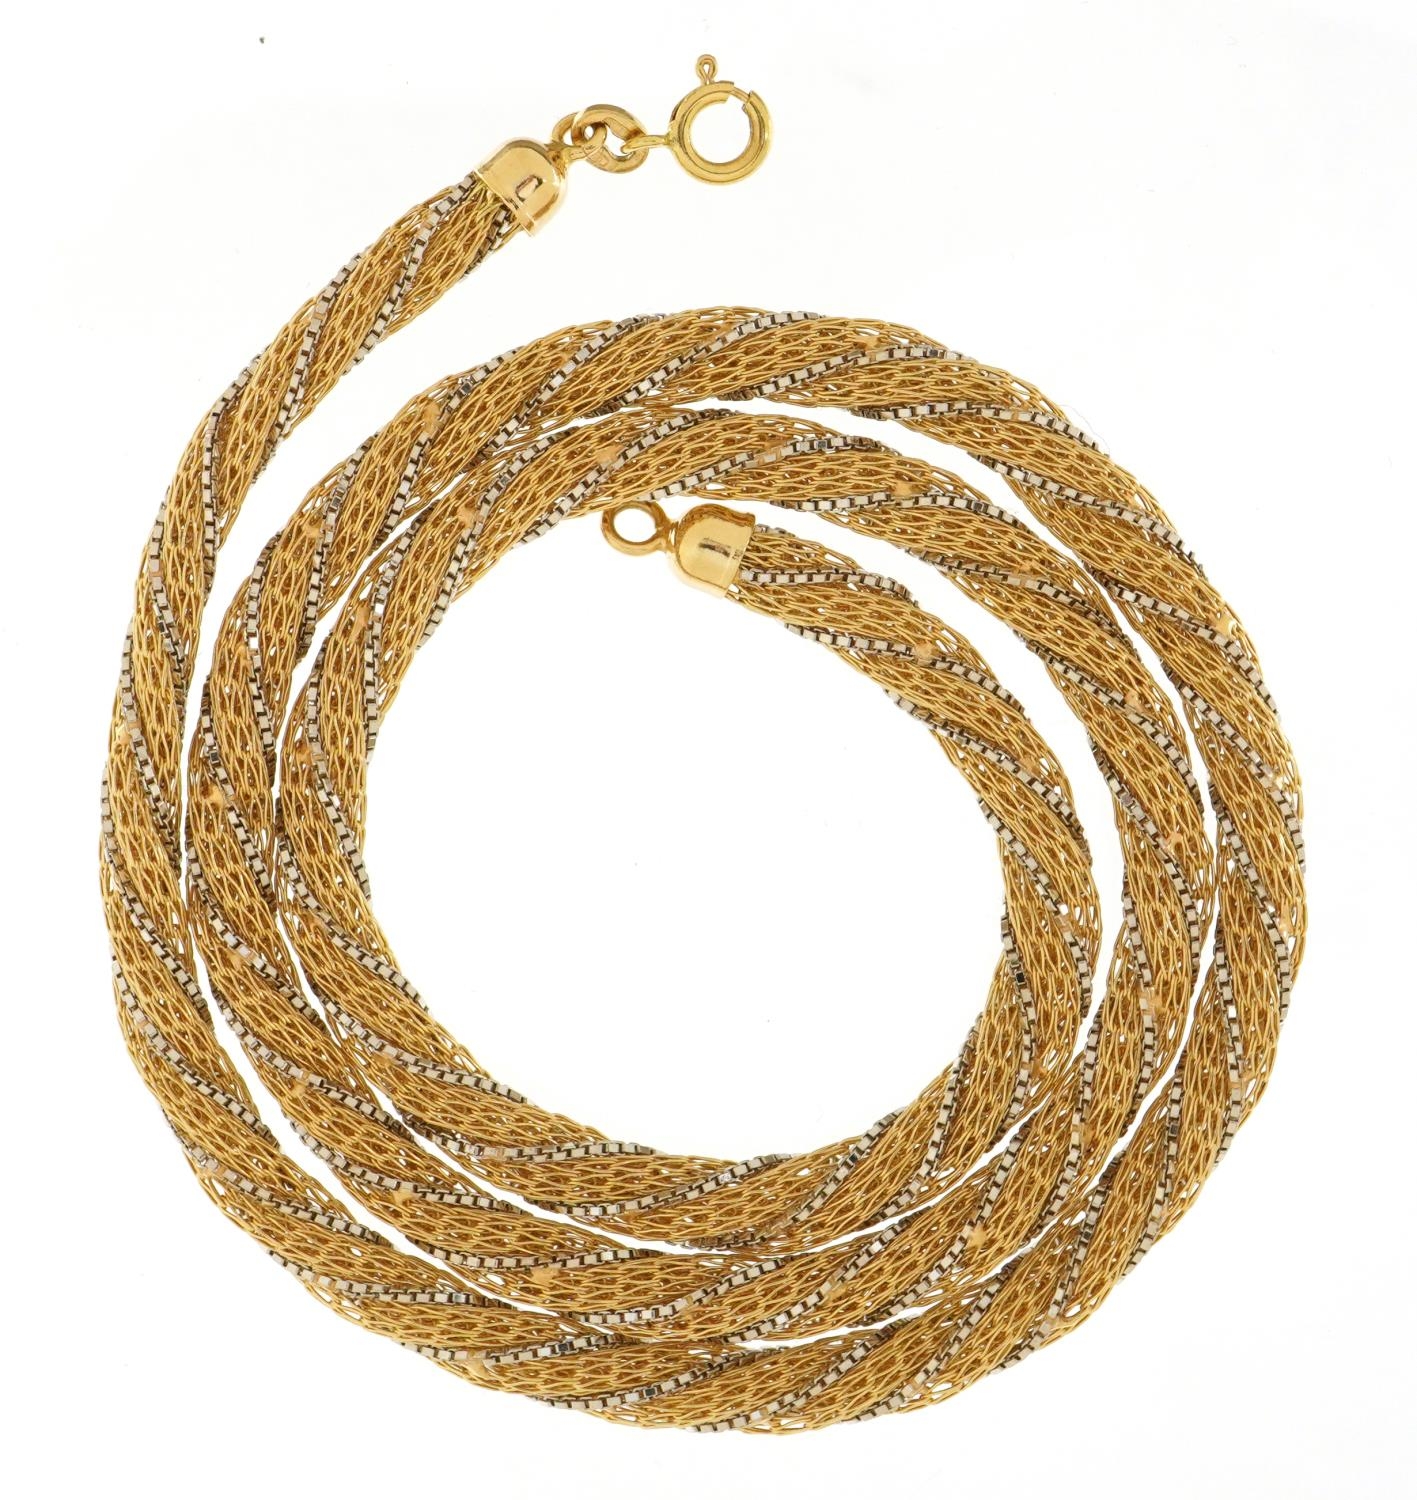 18ct two tone gold rope twist necklace with 1980s insurance valuation, 61cm in length, 41.9g - Image 3 of 6